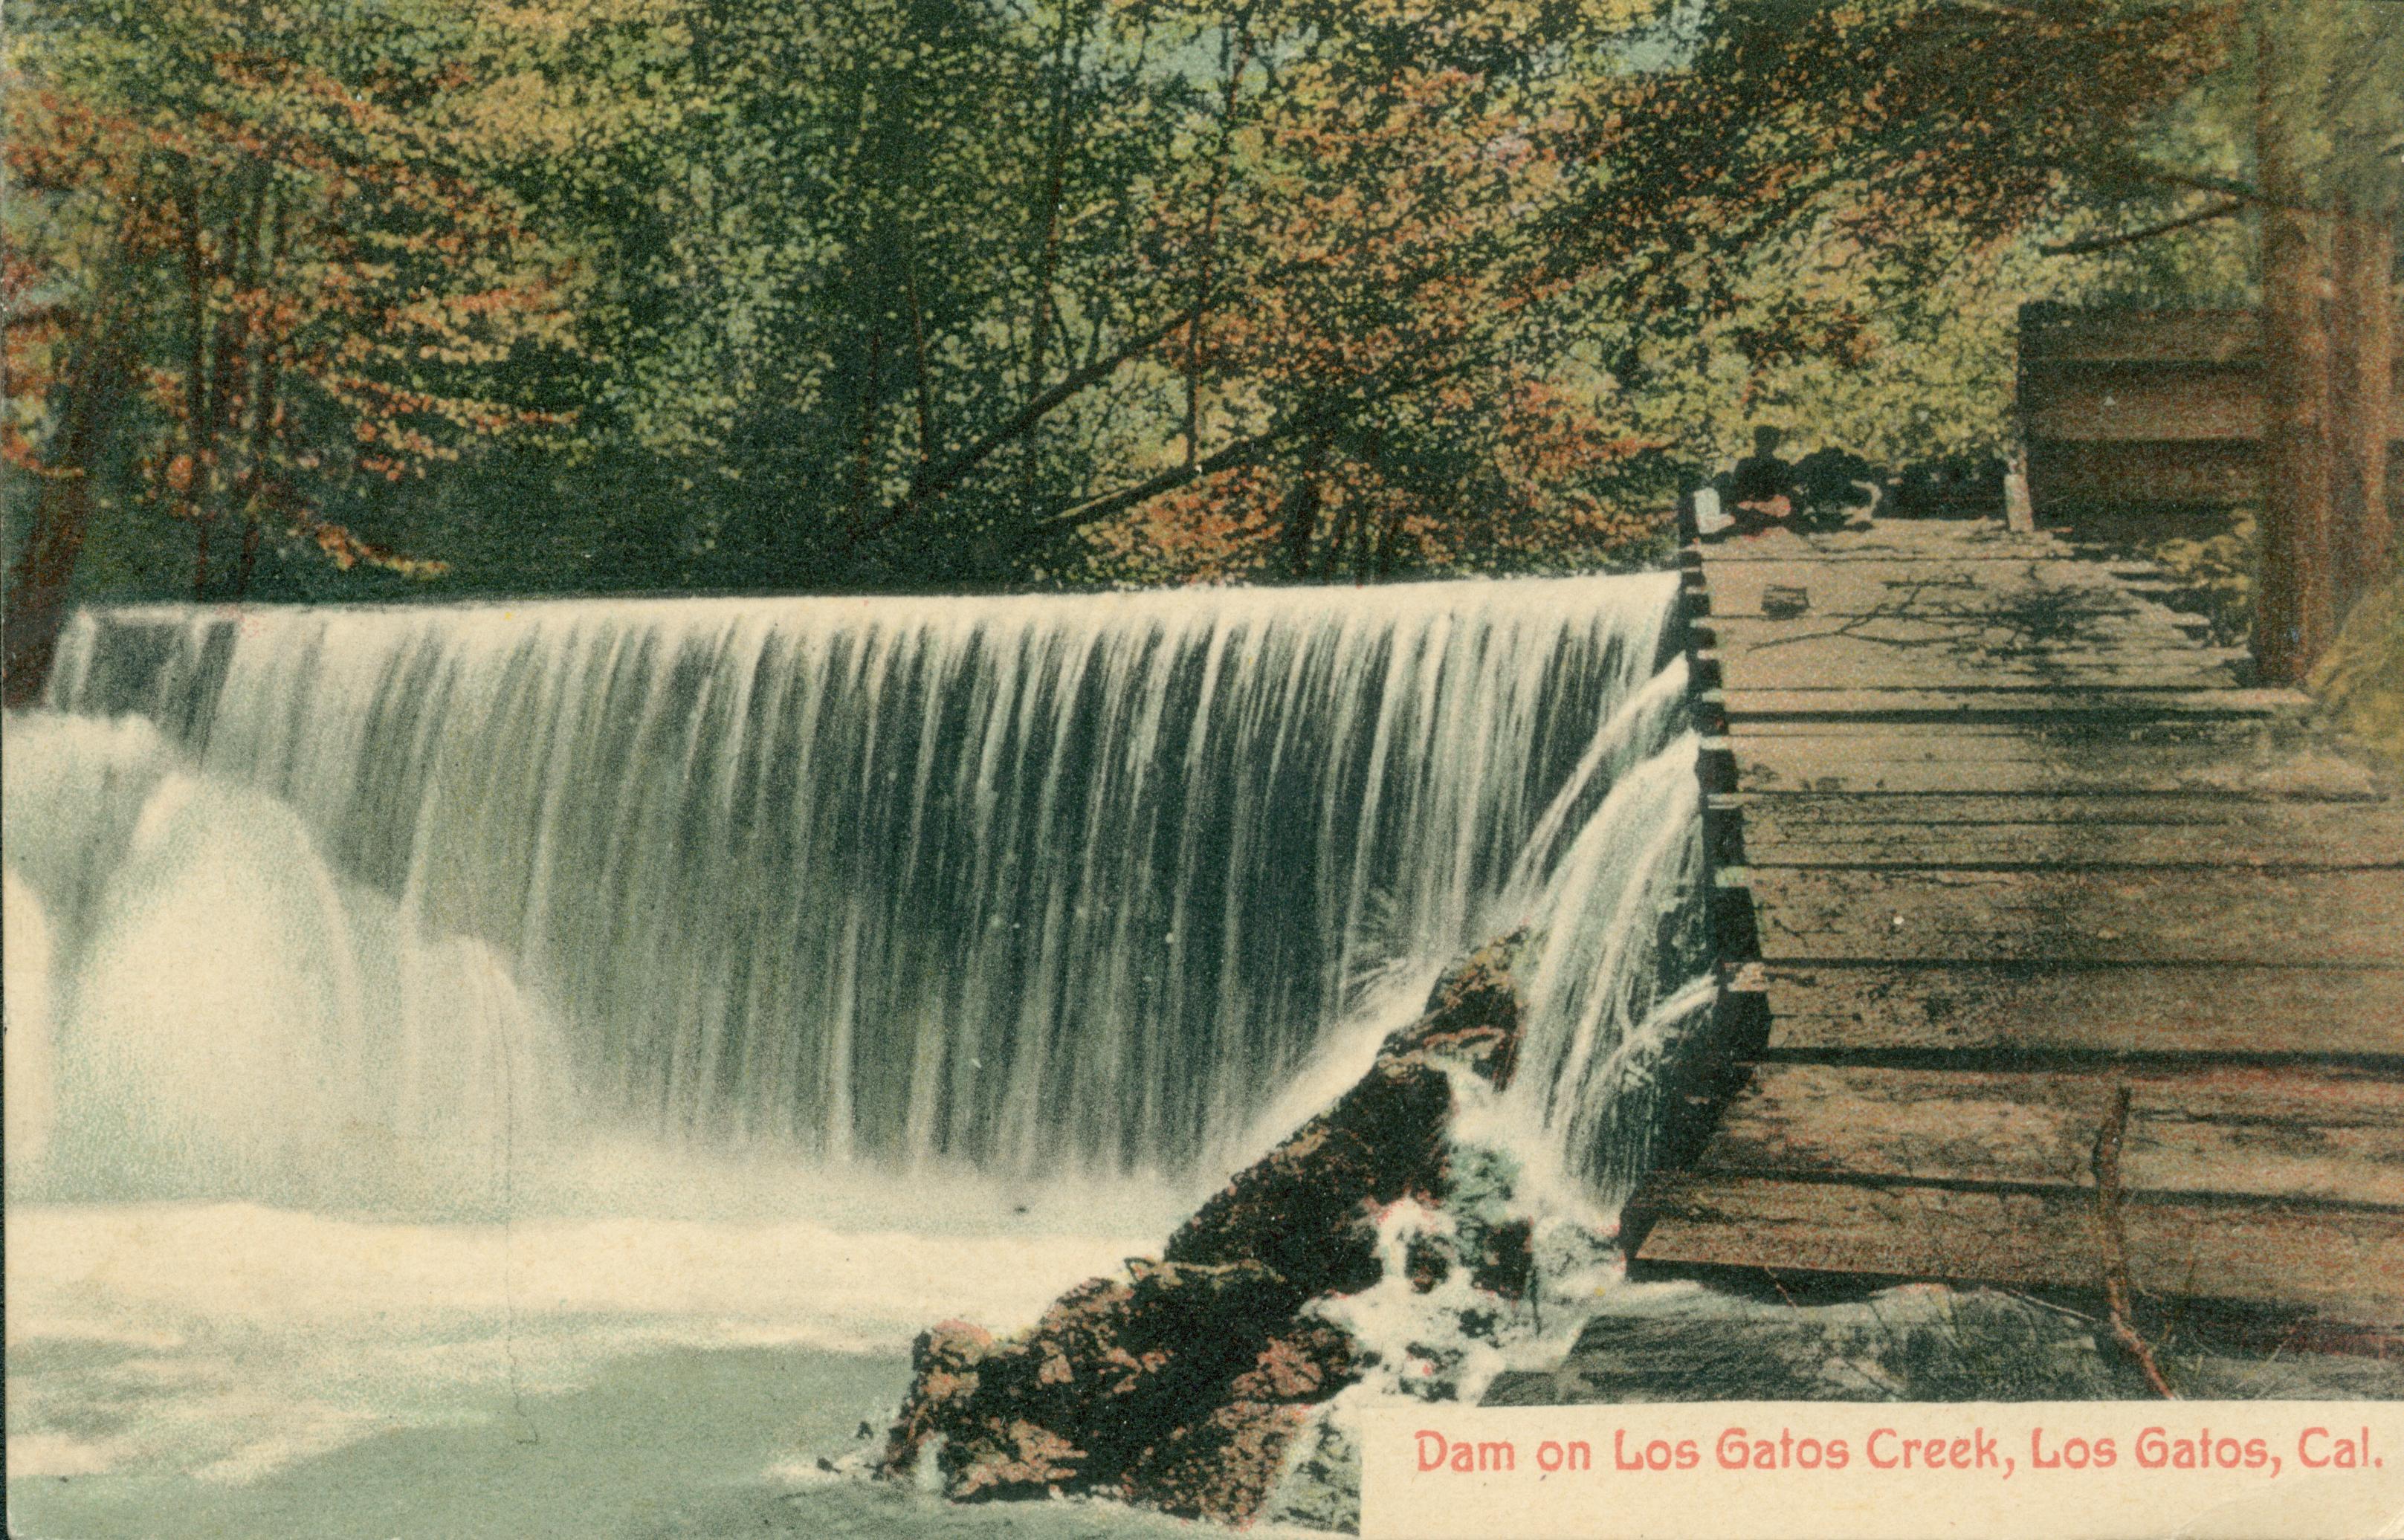 Water cascading over dam into creek, trees in background with small wooden bridge to the right of the creek